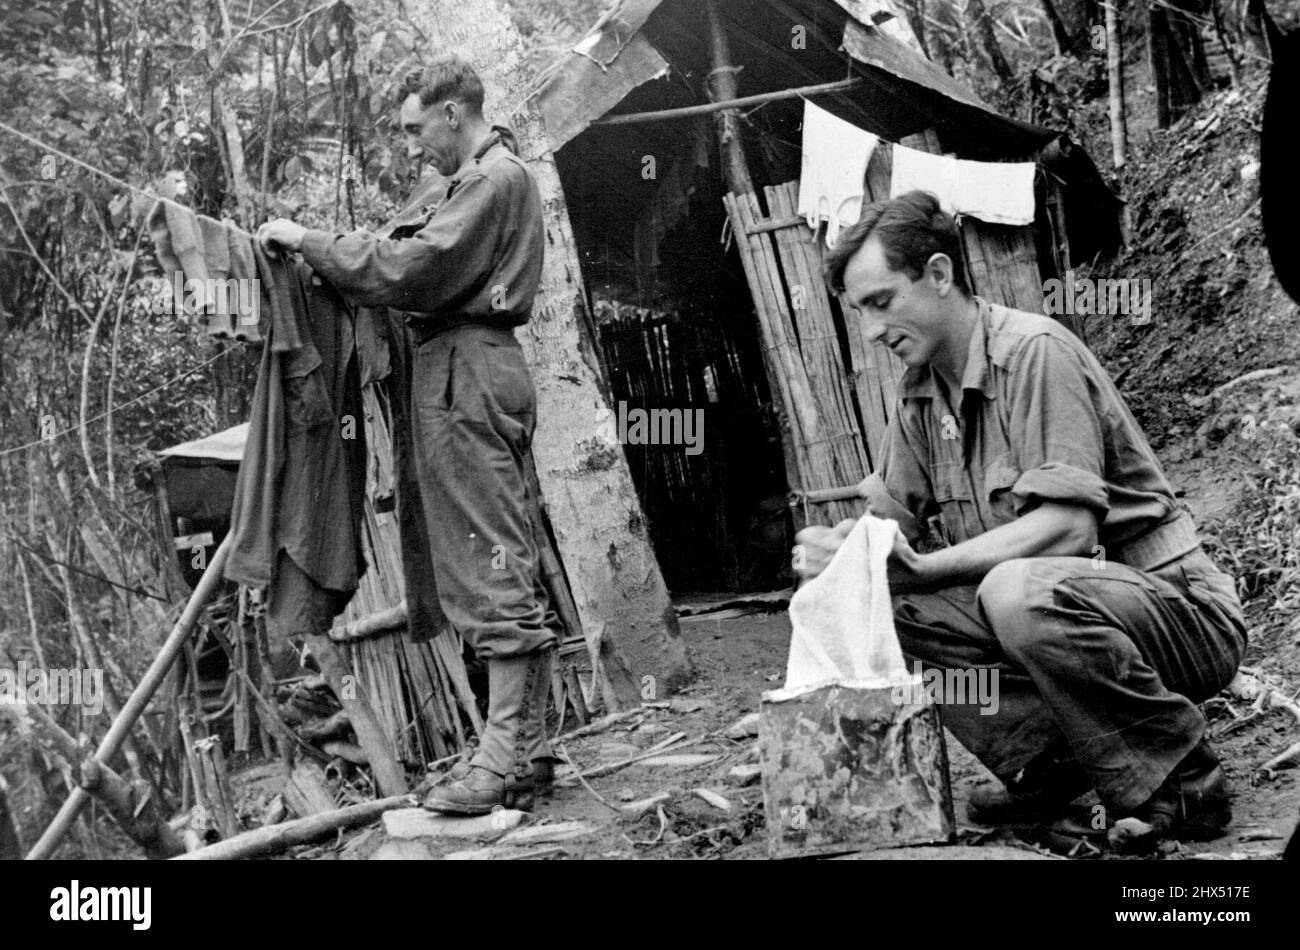 New Guinea Mubo Campaign. Washing day somewhere near Mubo on the side of a steeply graded slope. Staff Sergeant Les Almond of Easternwick, Victoria, and Corporal Frank Milroy of St. Kilda , outside their jungle hut. September 7, 1943. (Department of Information, Commonwealth of Australia). Stock Photo